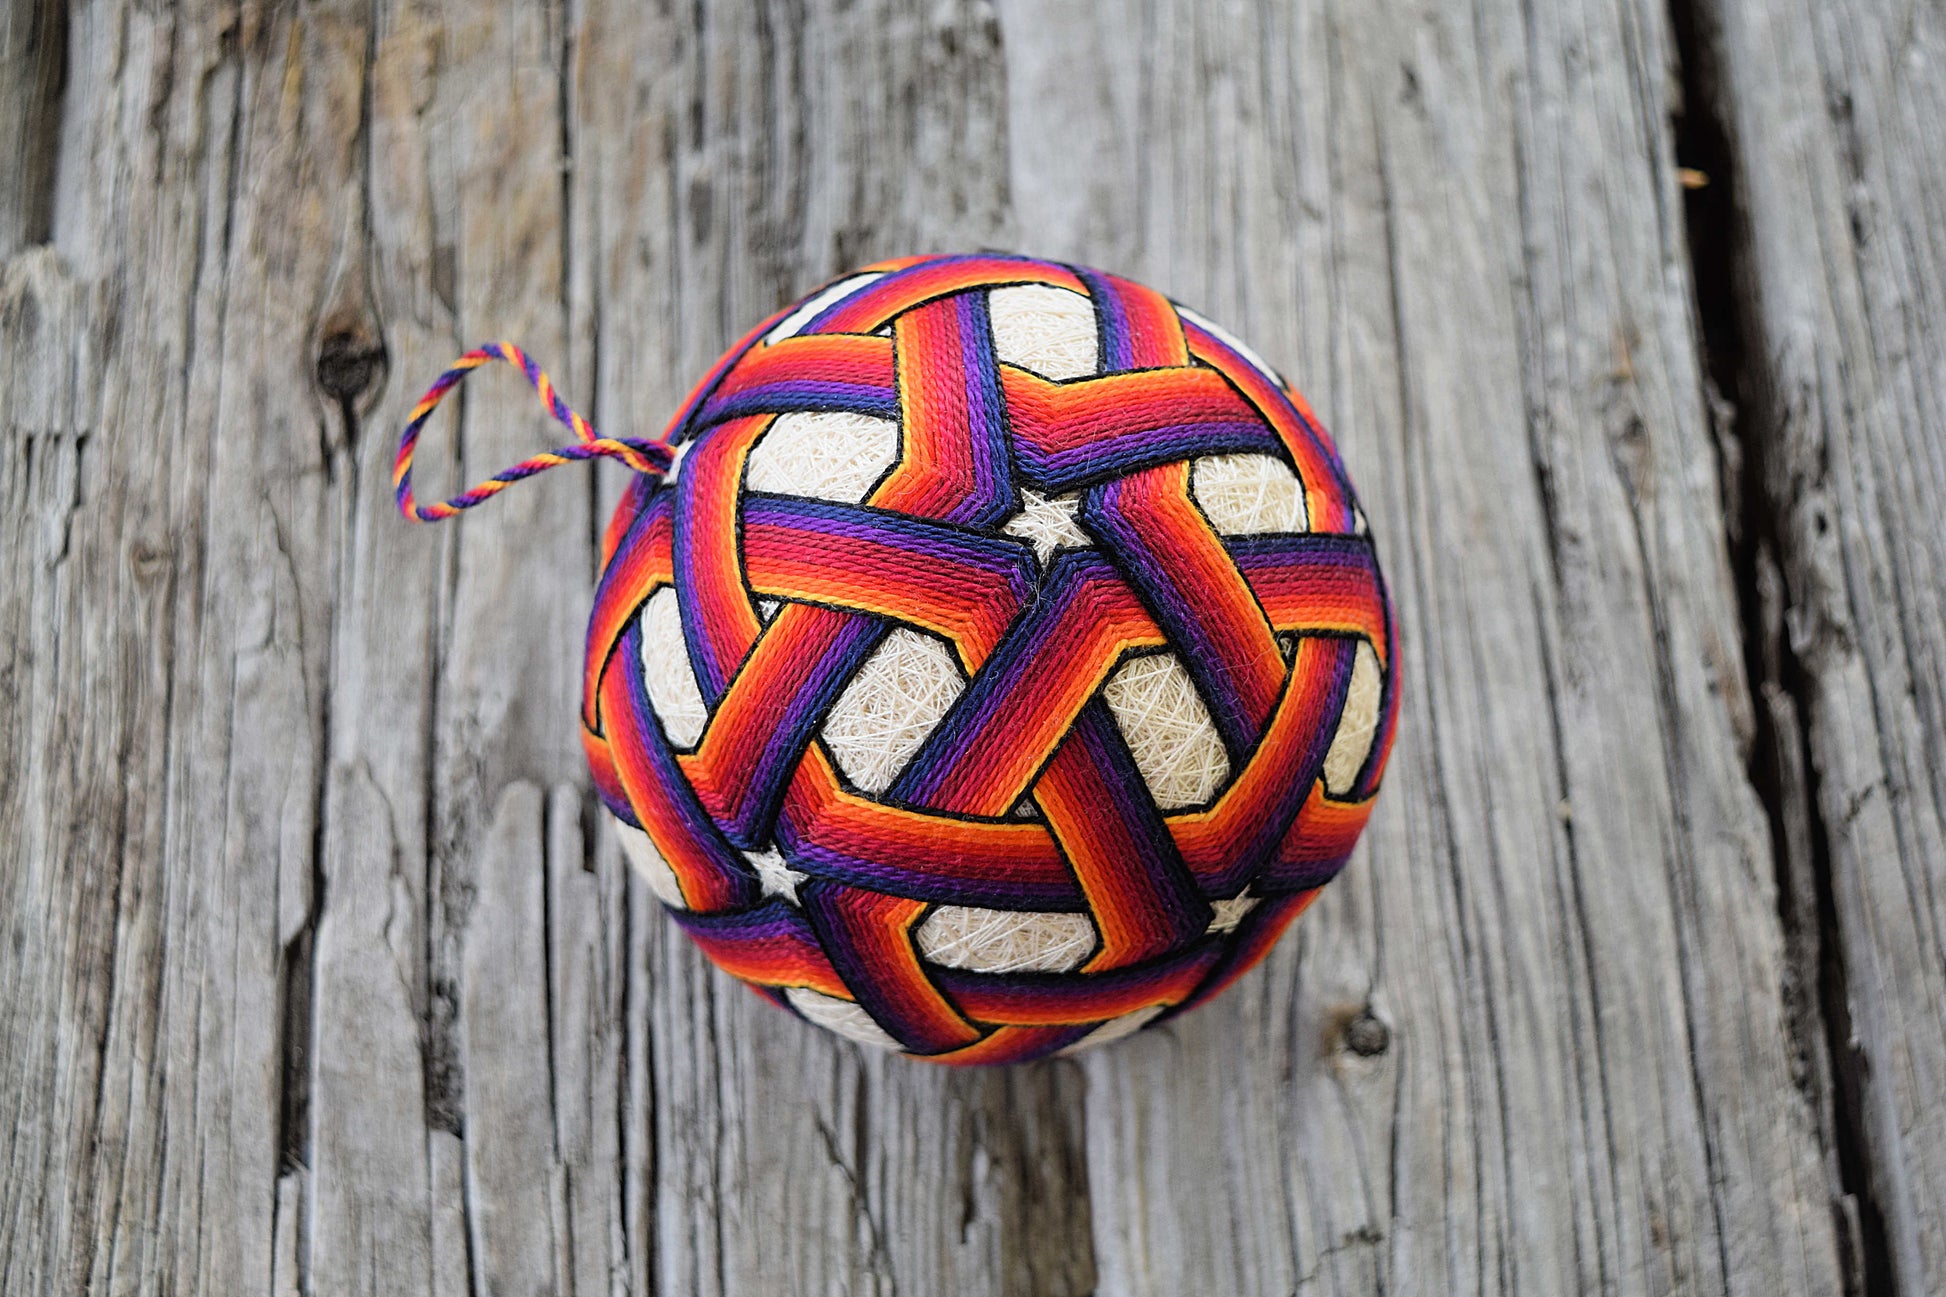 Japanese temari ball embroidered in interlacing pentagons in vibrant rainbow colors